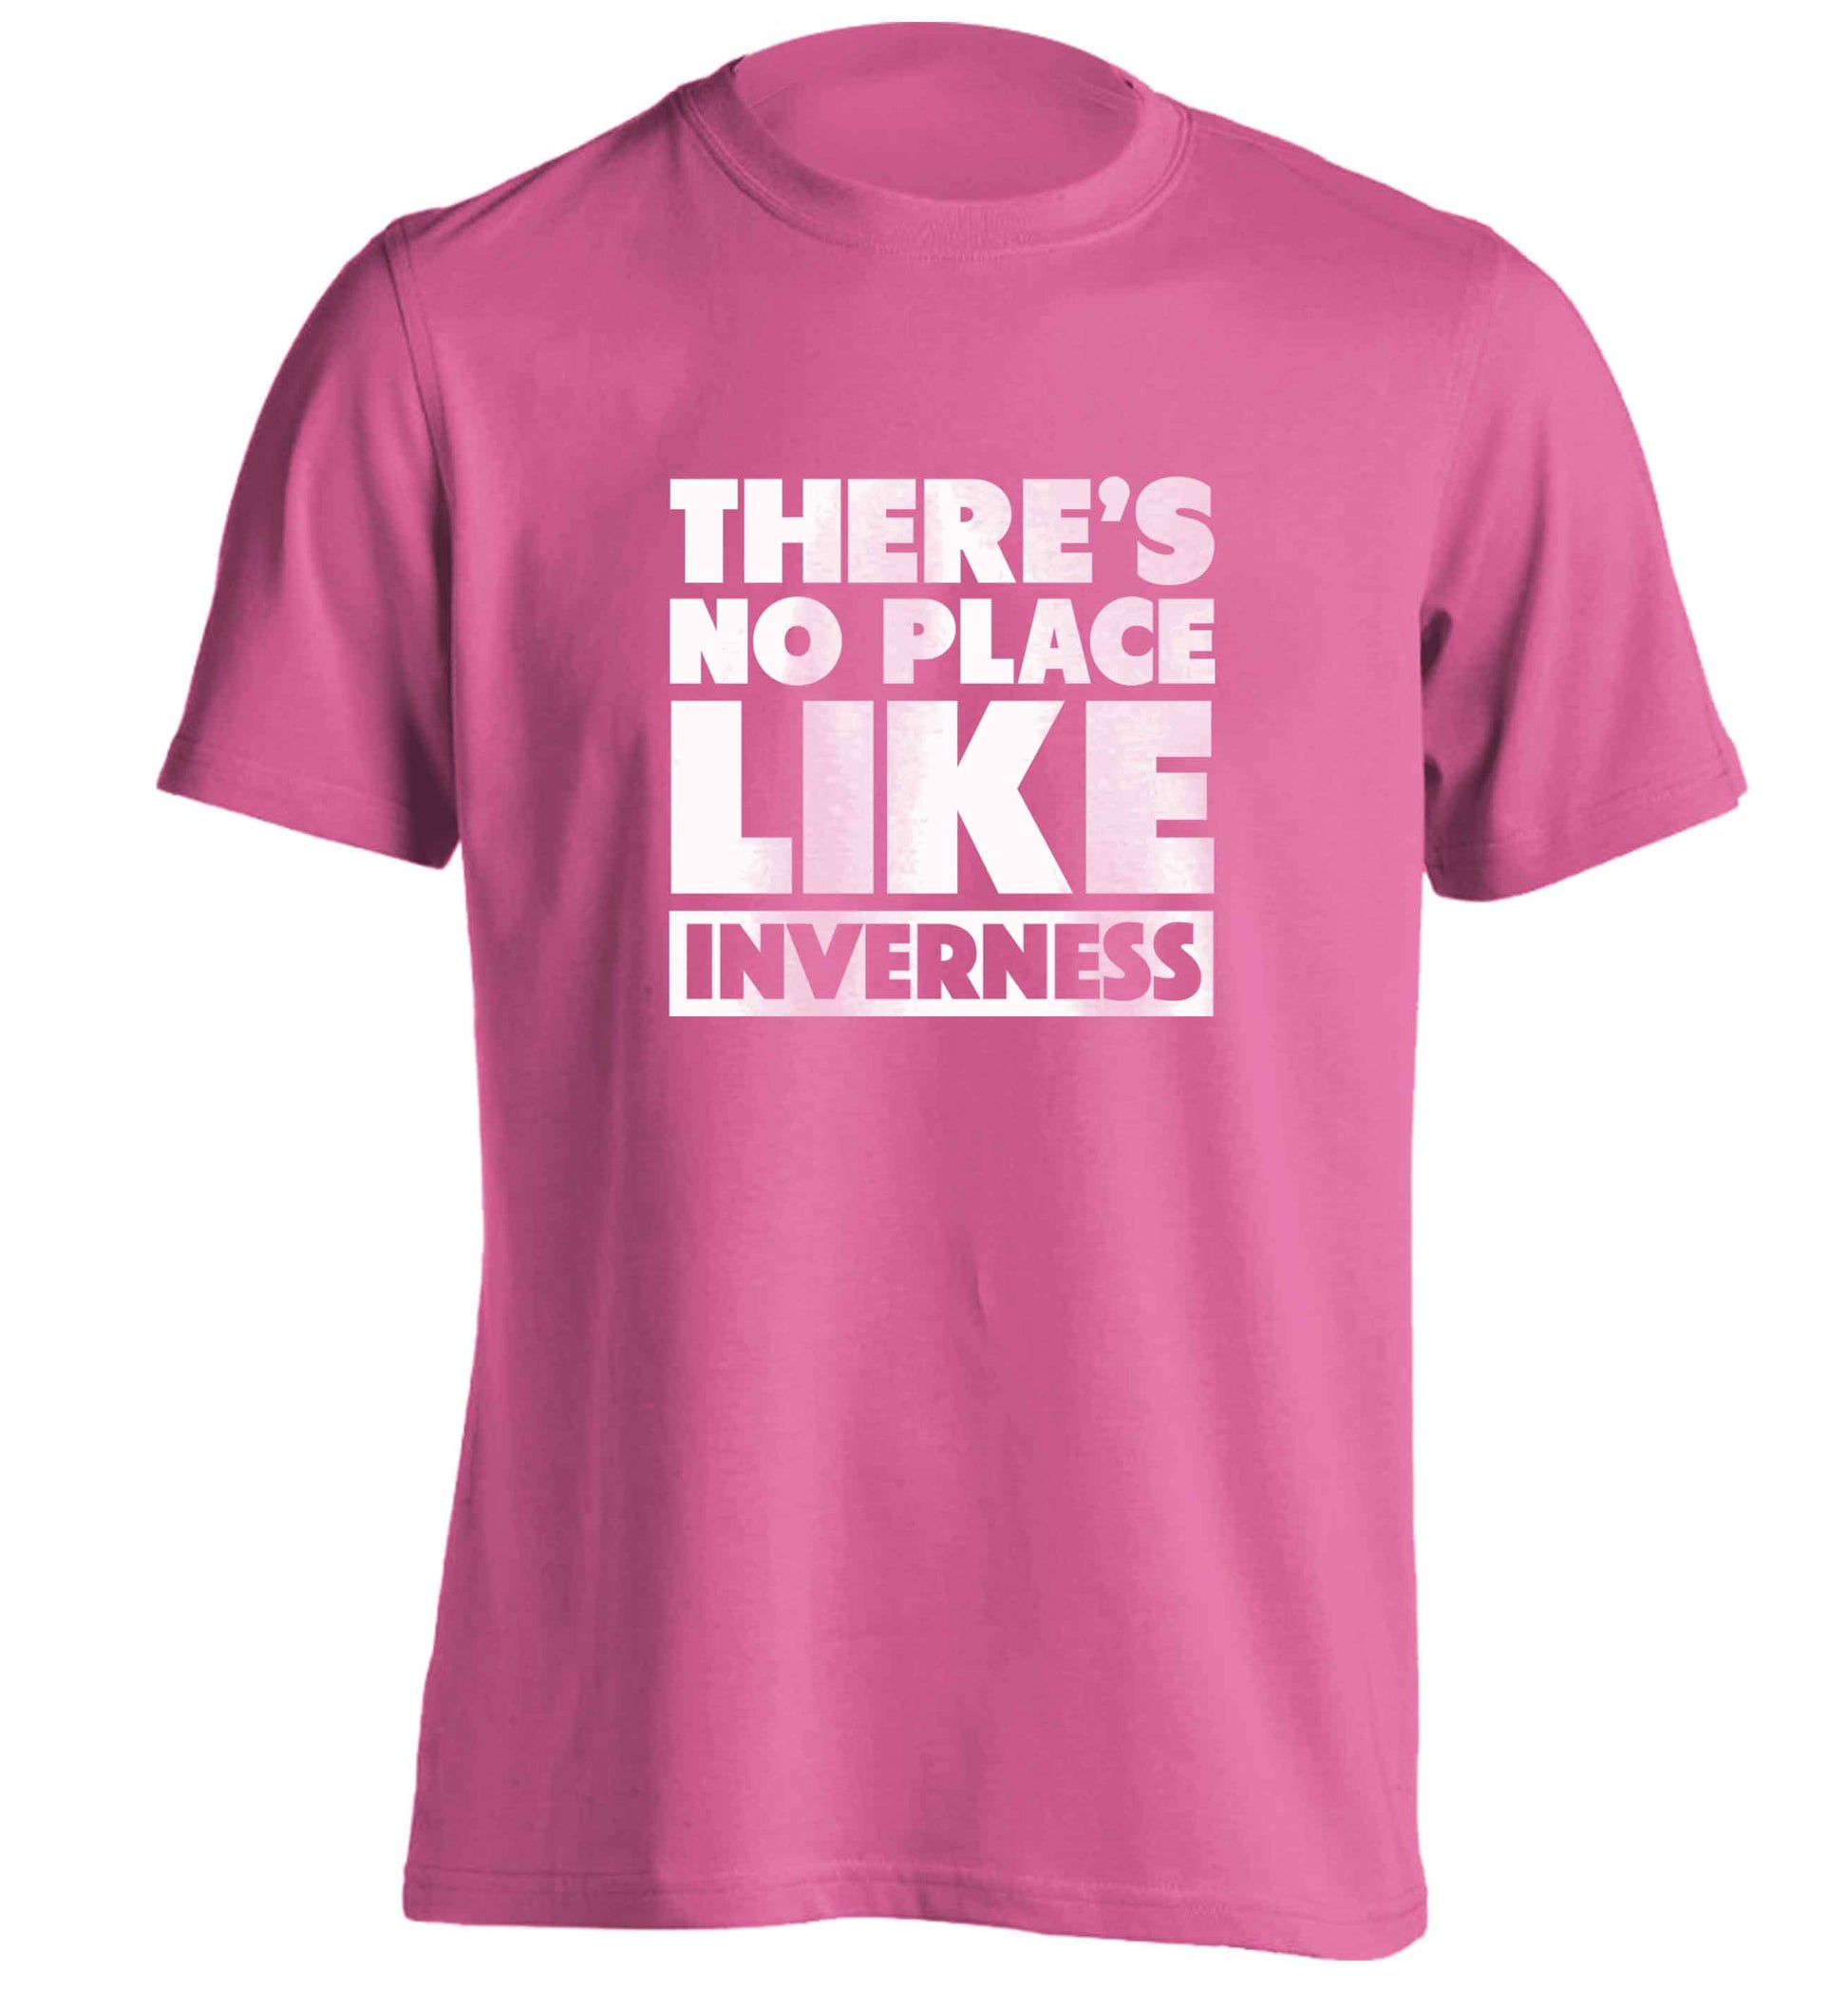 There's no place like Inverness adults unisex pink Tshirt 2XL